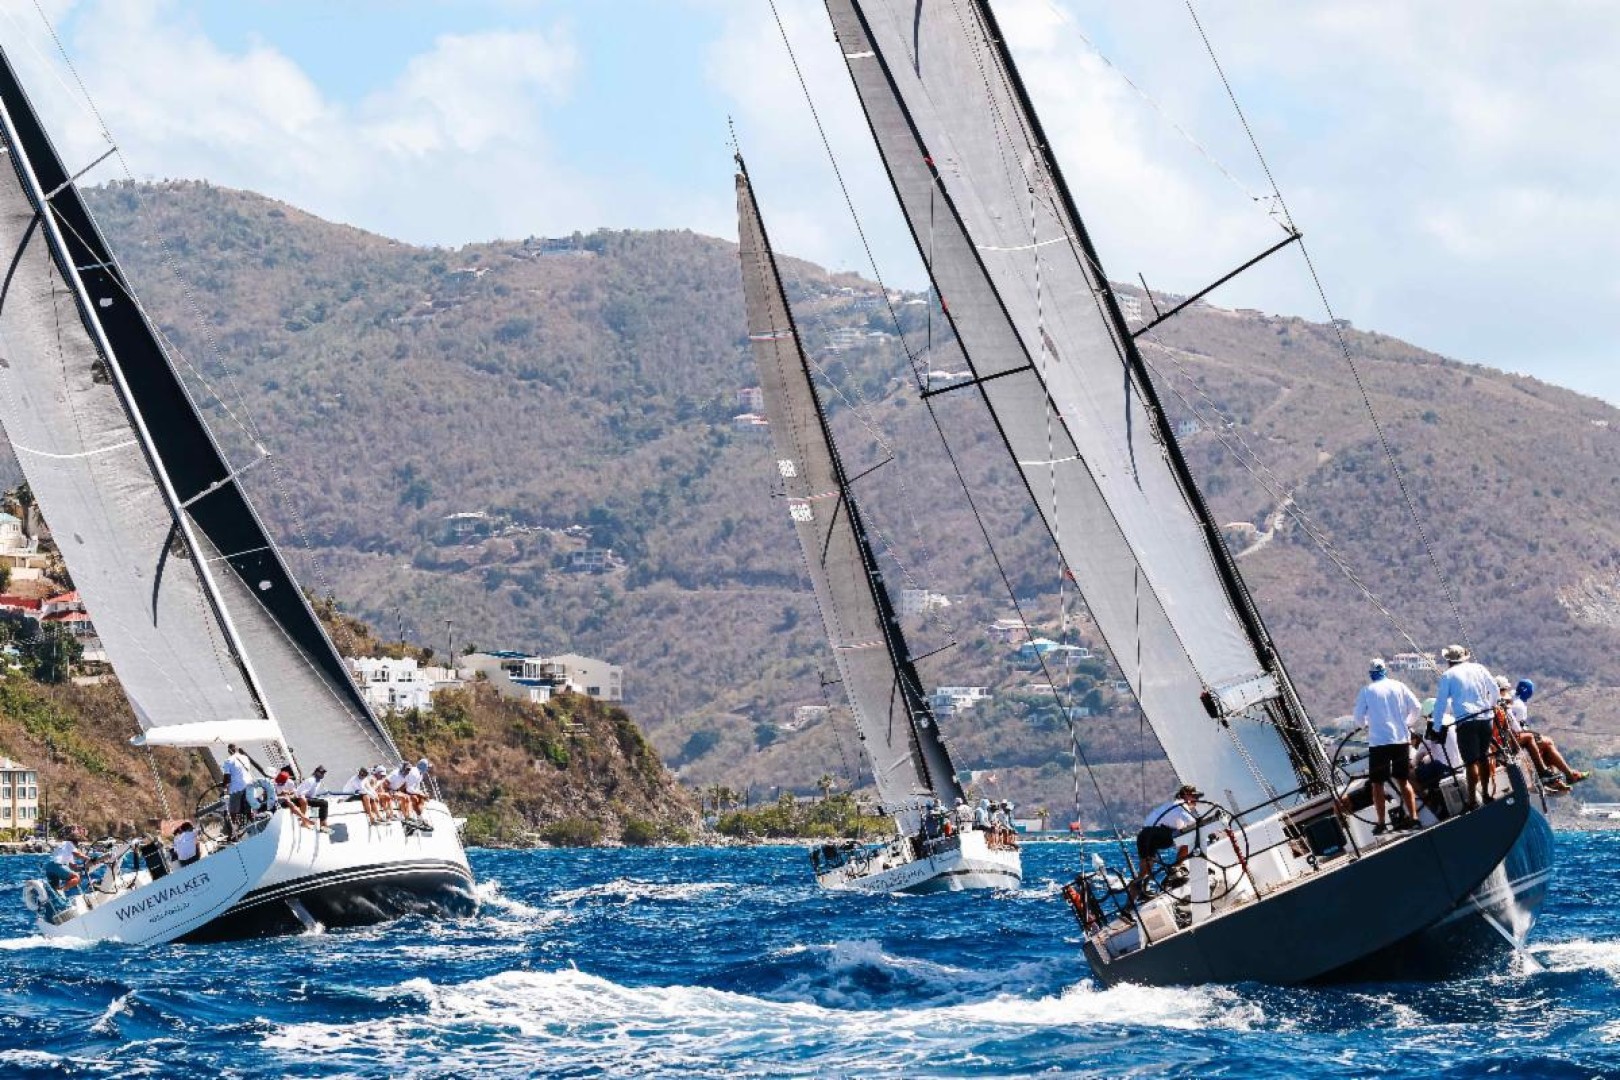 Champagne sailing conditions on the final day of the 50th BVI Spring Regatta & Sailing Festival © Ingrid Abery/https://www.ingridabery.com